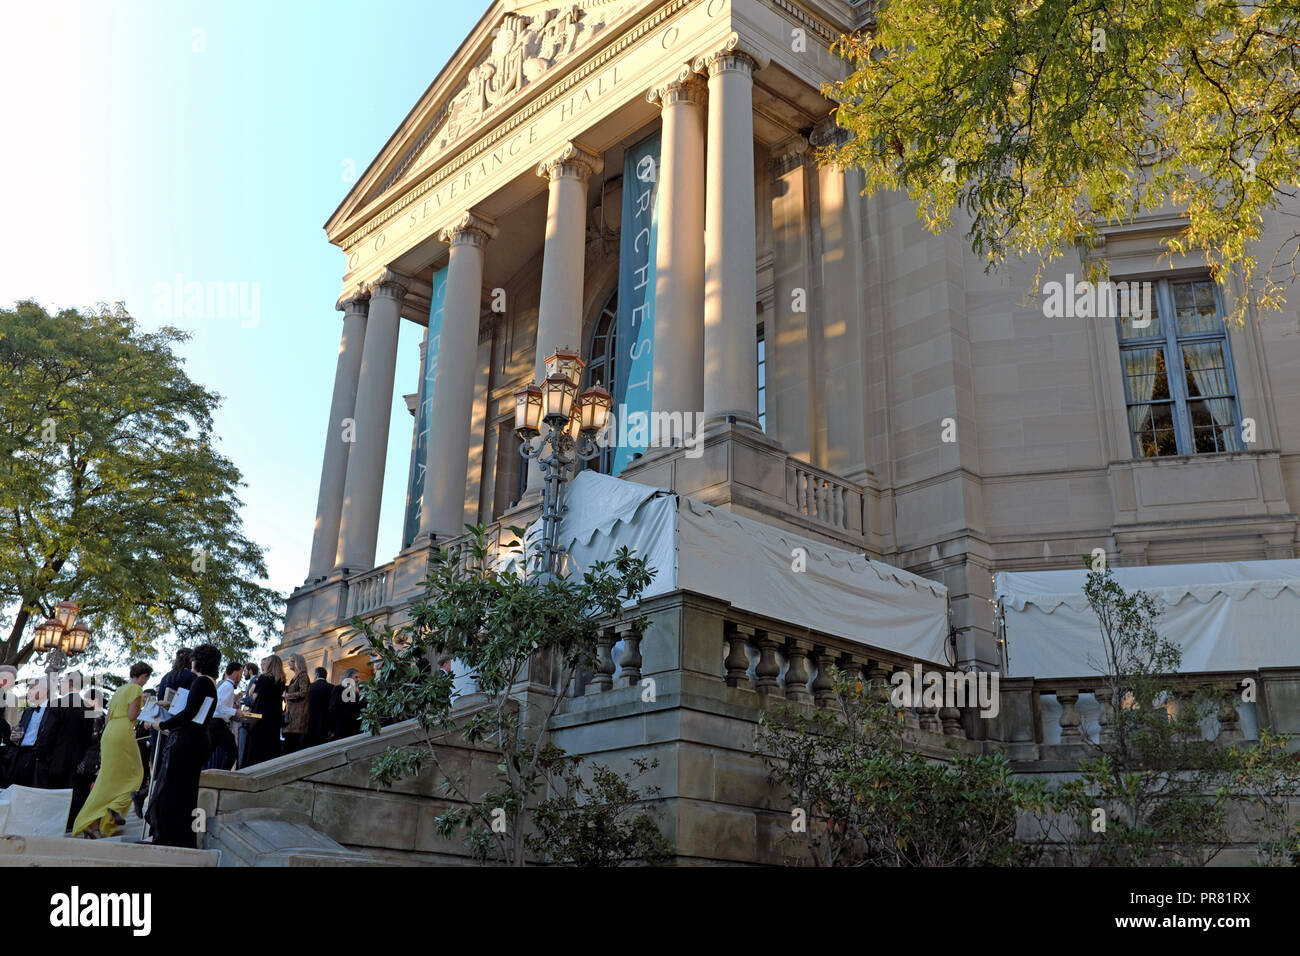 Cleveland, Ohio, USA.  29th Sept, 2018. Patrons gather on Severance Hall Front Terrace for socializing as part of the Cleveland Orchestra 100th Anniversary gala prior to the Orchestra performance.  Severance Hall is the home concert hall of the Cleveland Orchestra.  Credit: Mark Kanning/Alamy Live News. Stock Photo